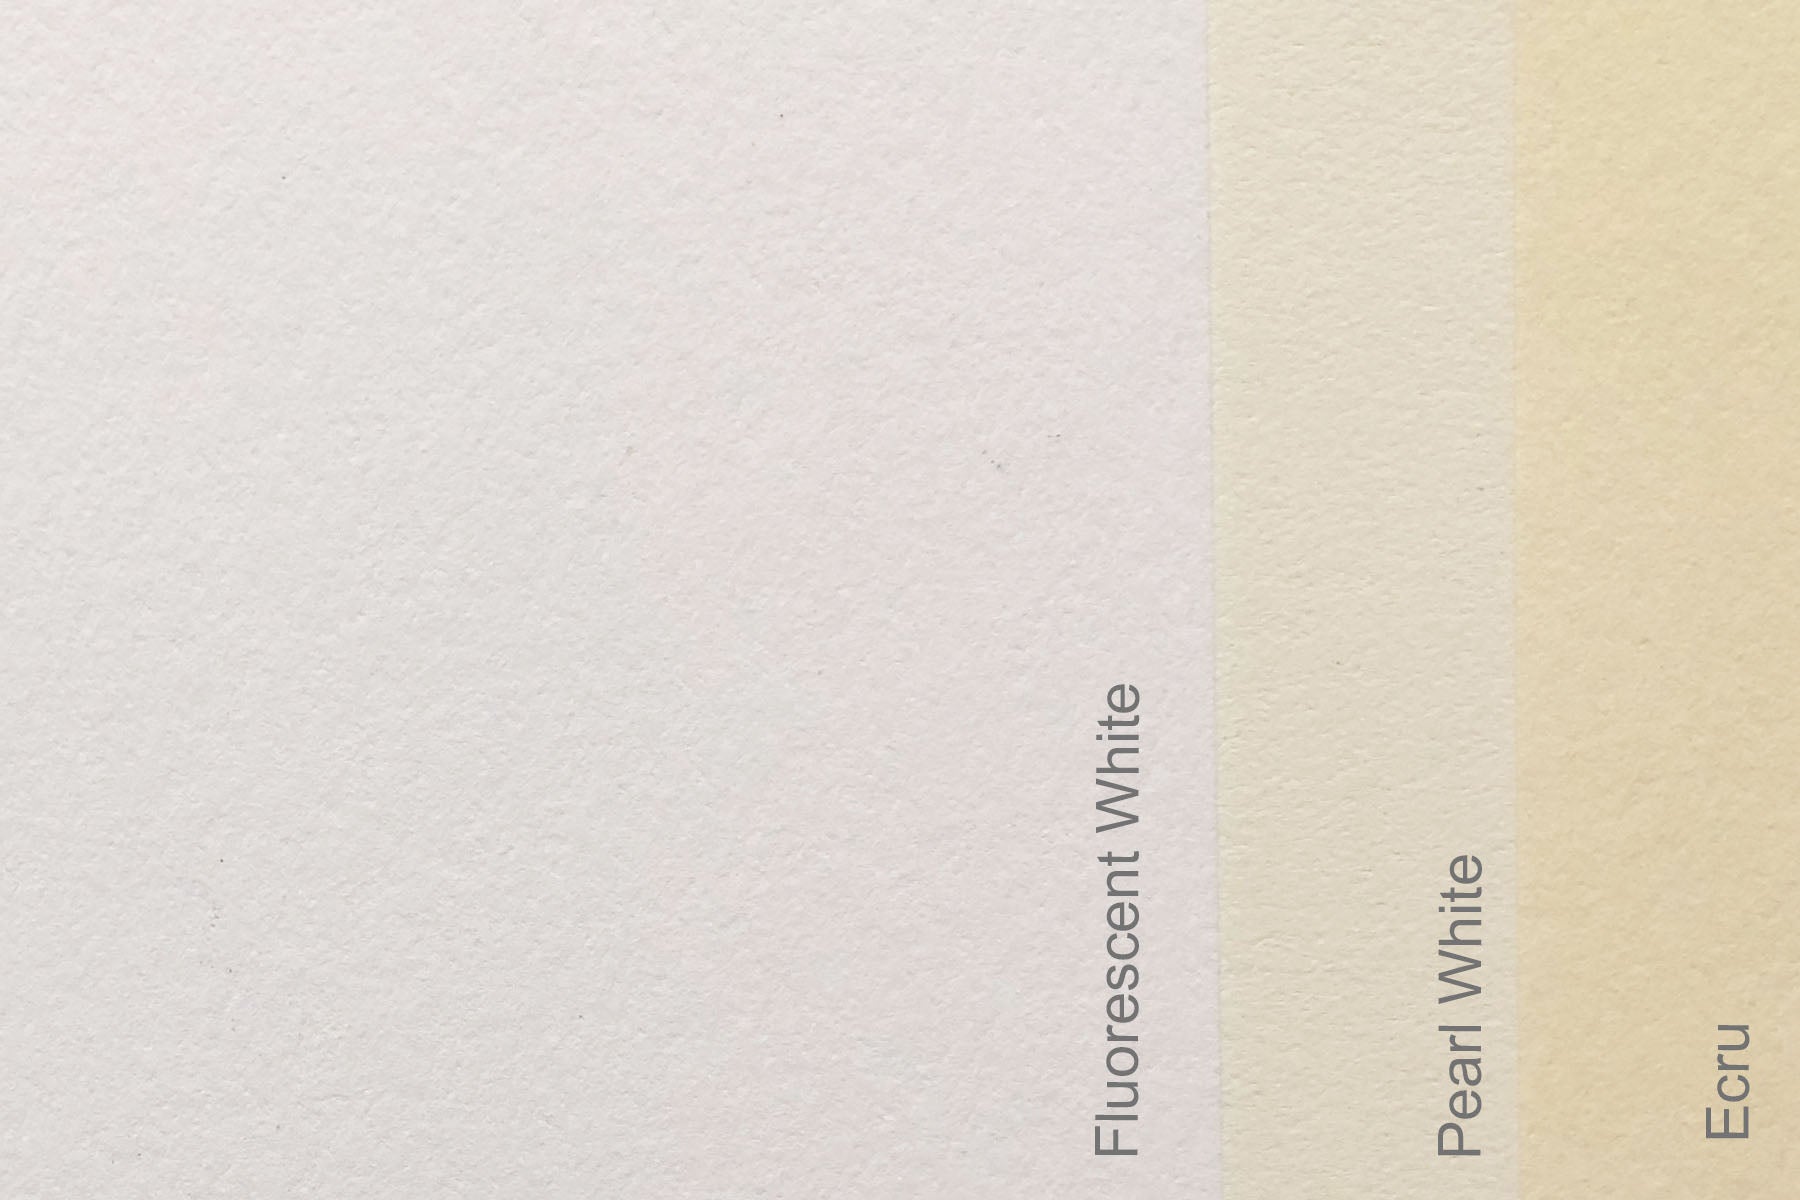 Premium White Smooth Matte Card Stock 5 x 7 - 110# Cover 300 GSM - 100  Pack - Made in the USA (Recycled White)